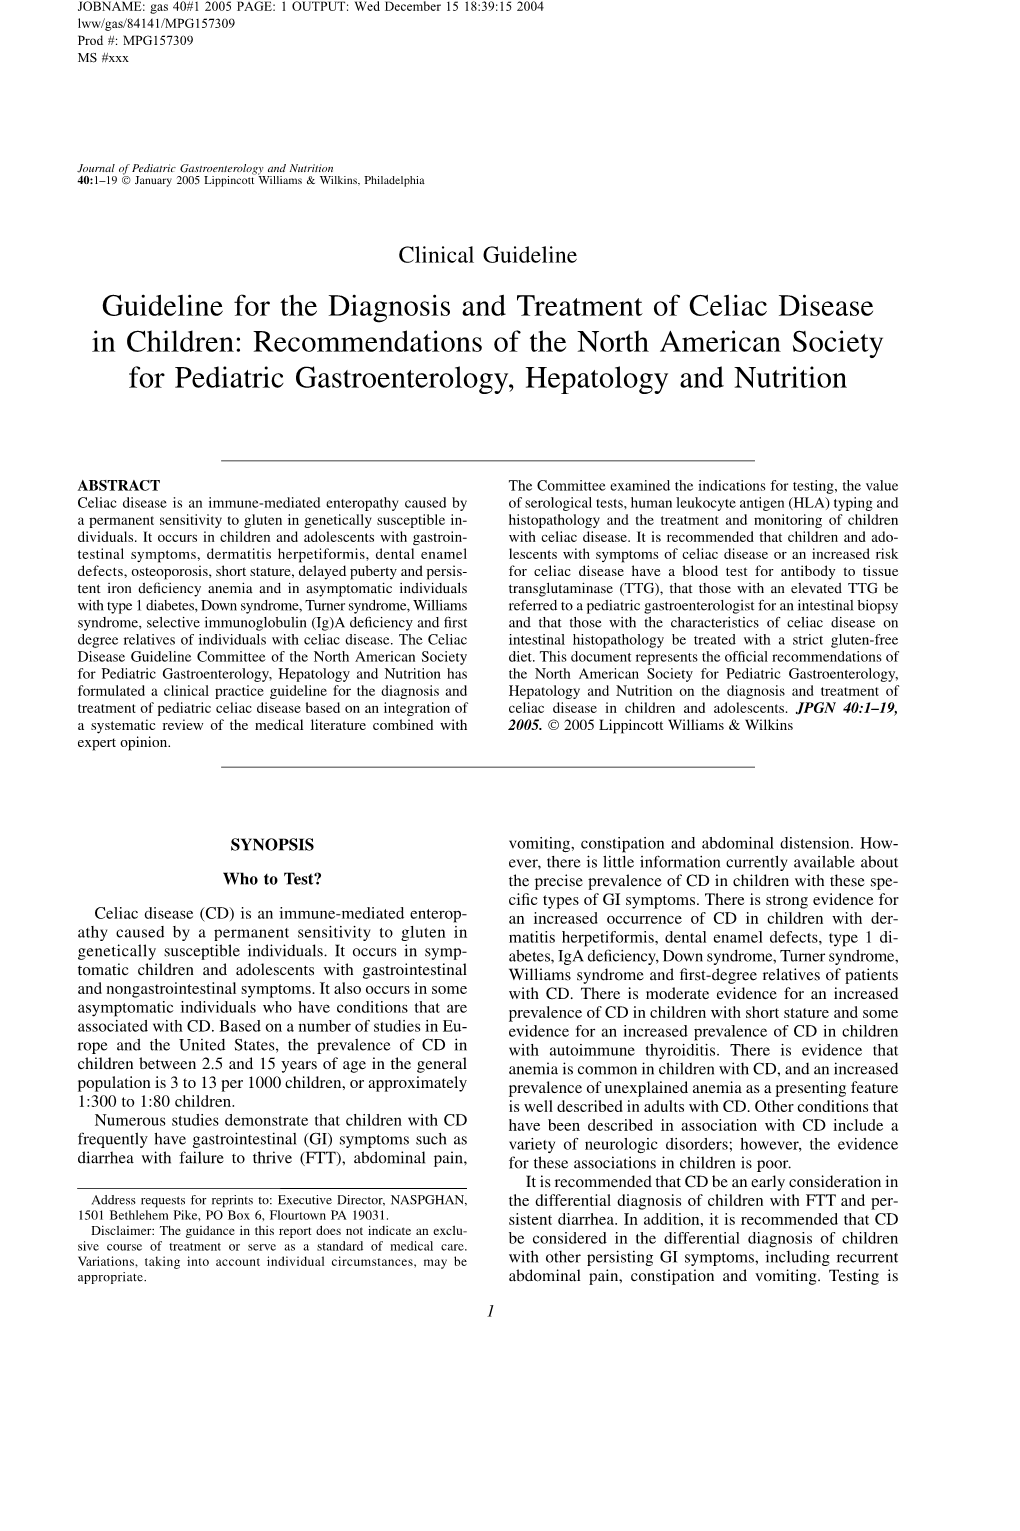 Guideline for the Diagnosis and Treatment of Celiac